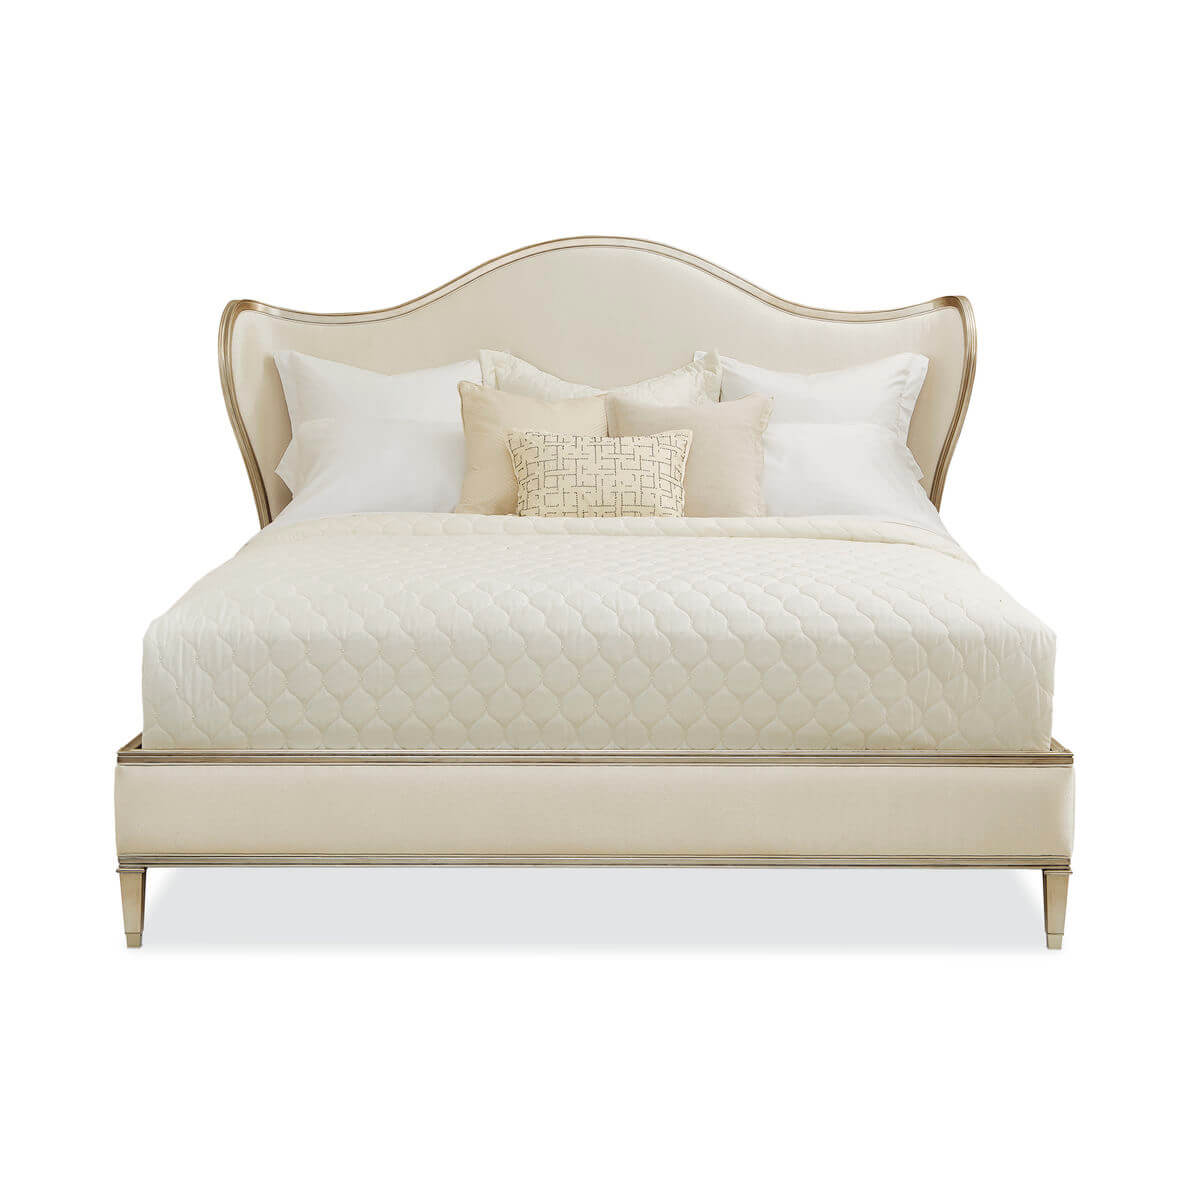 Transitional Style Upholstered California King Bed - English Georgian America